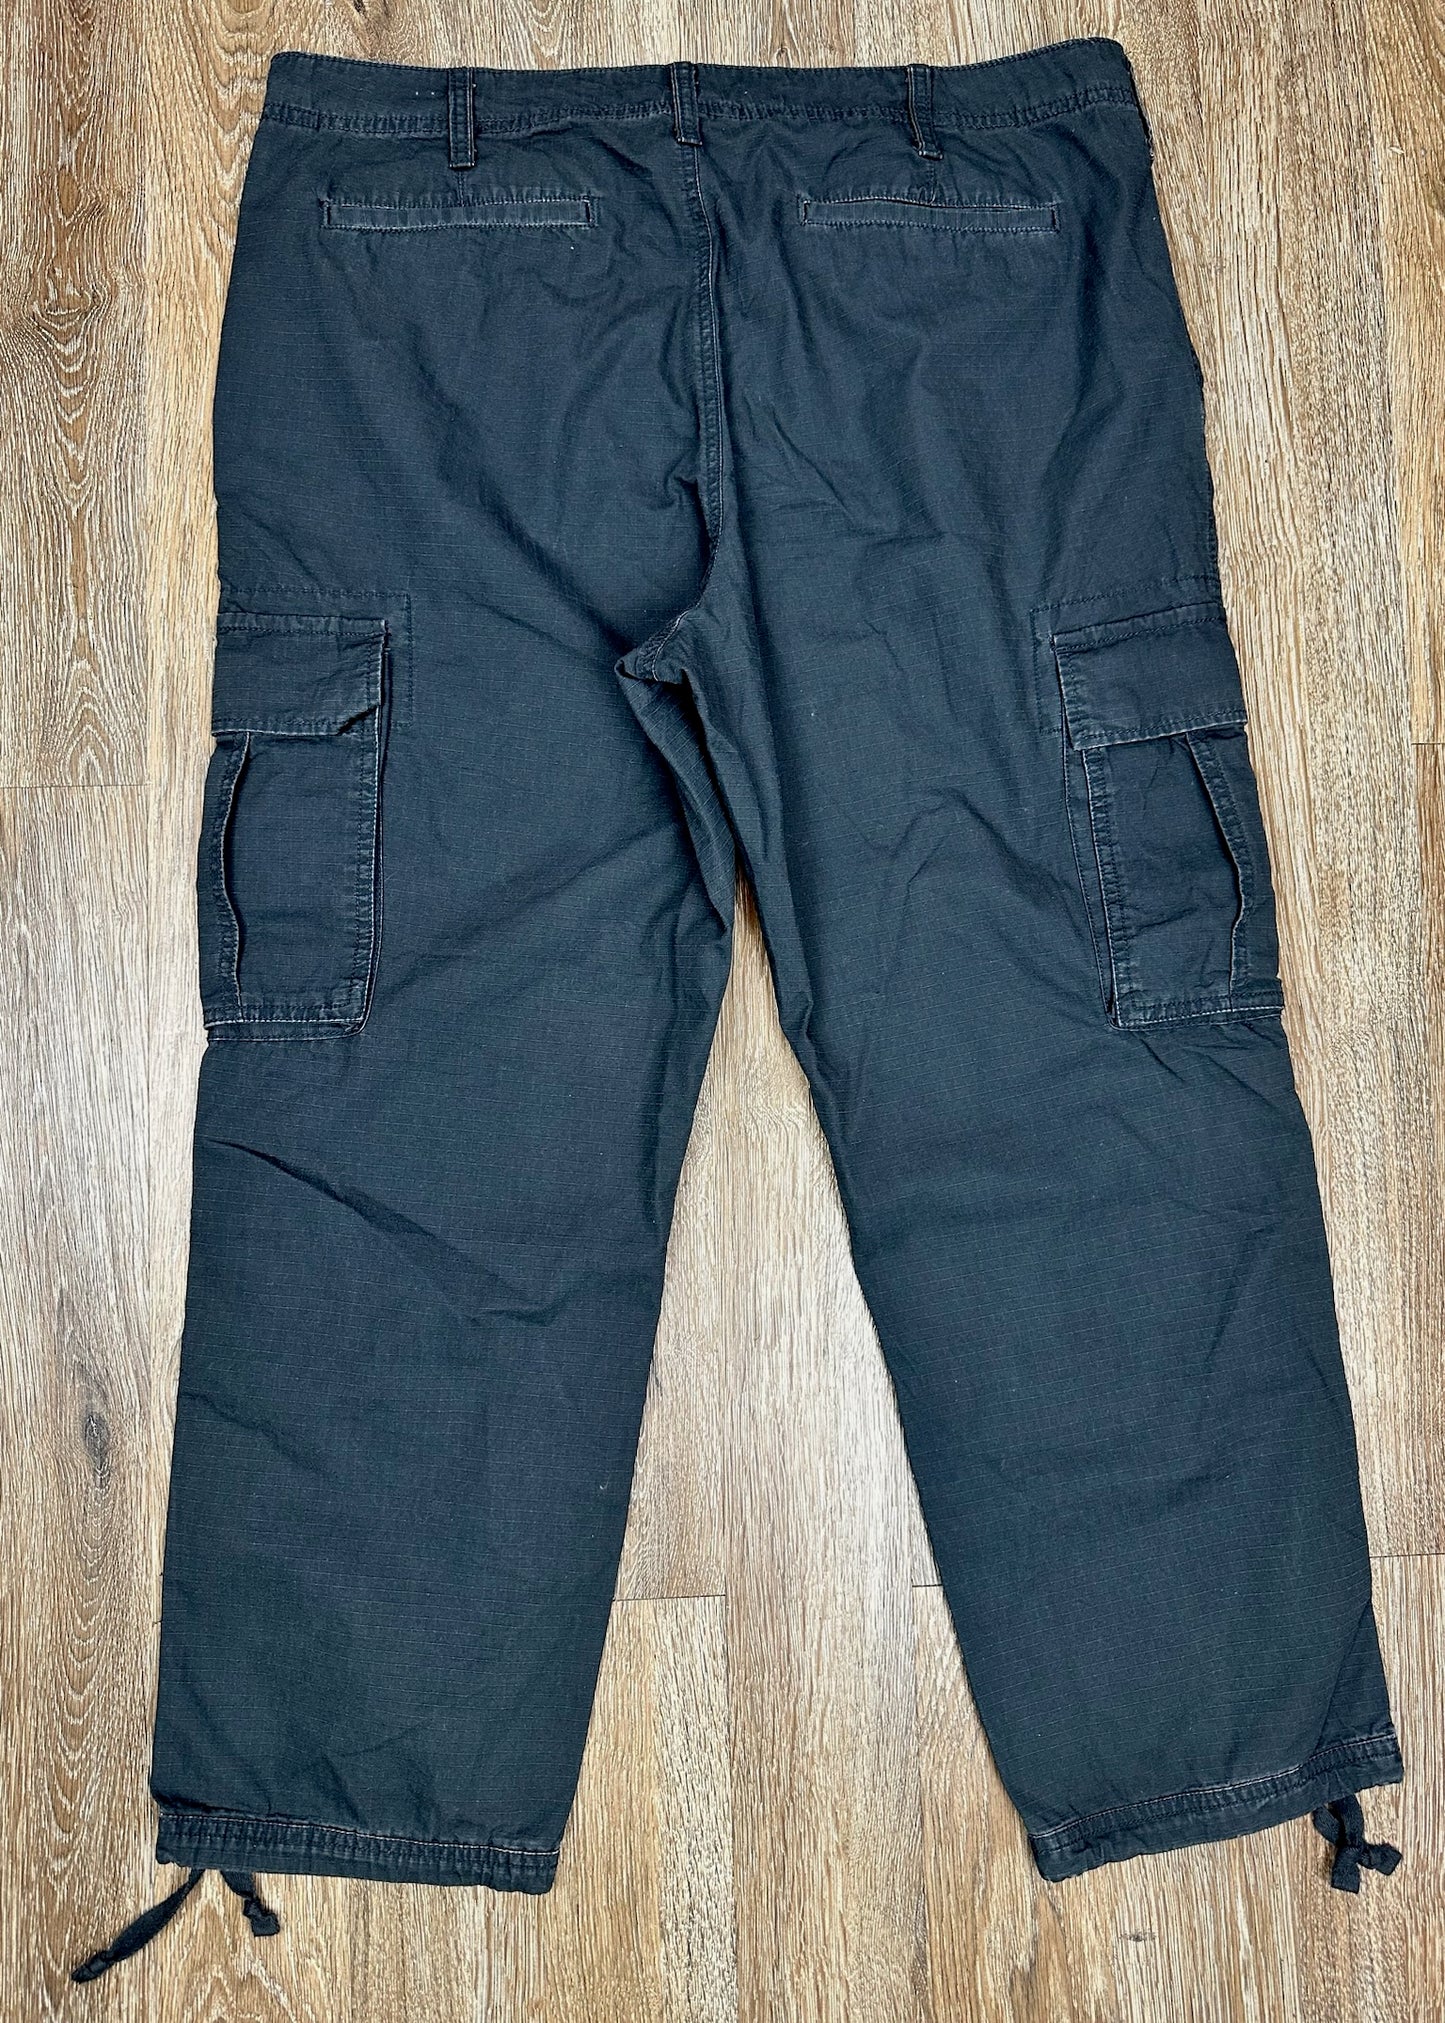 Mens Grey Cargo Pants by Old Navy